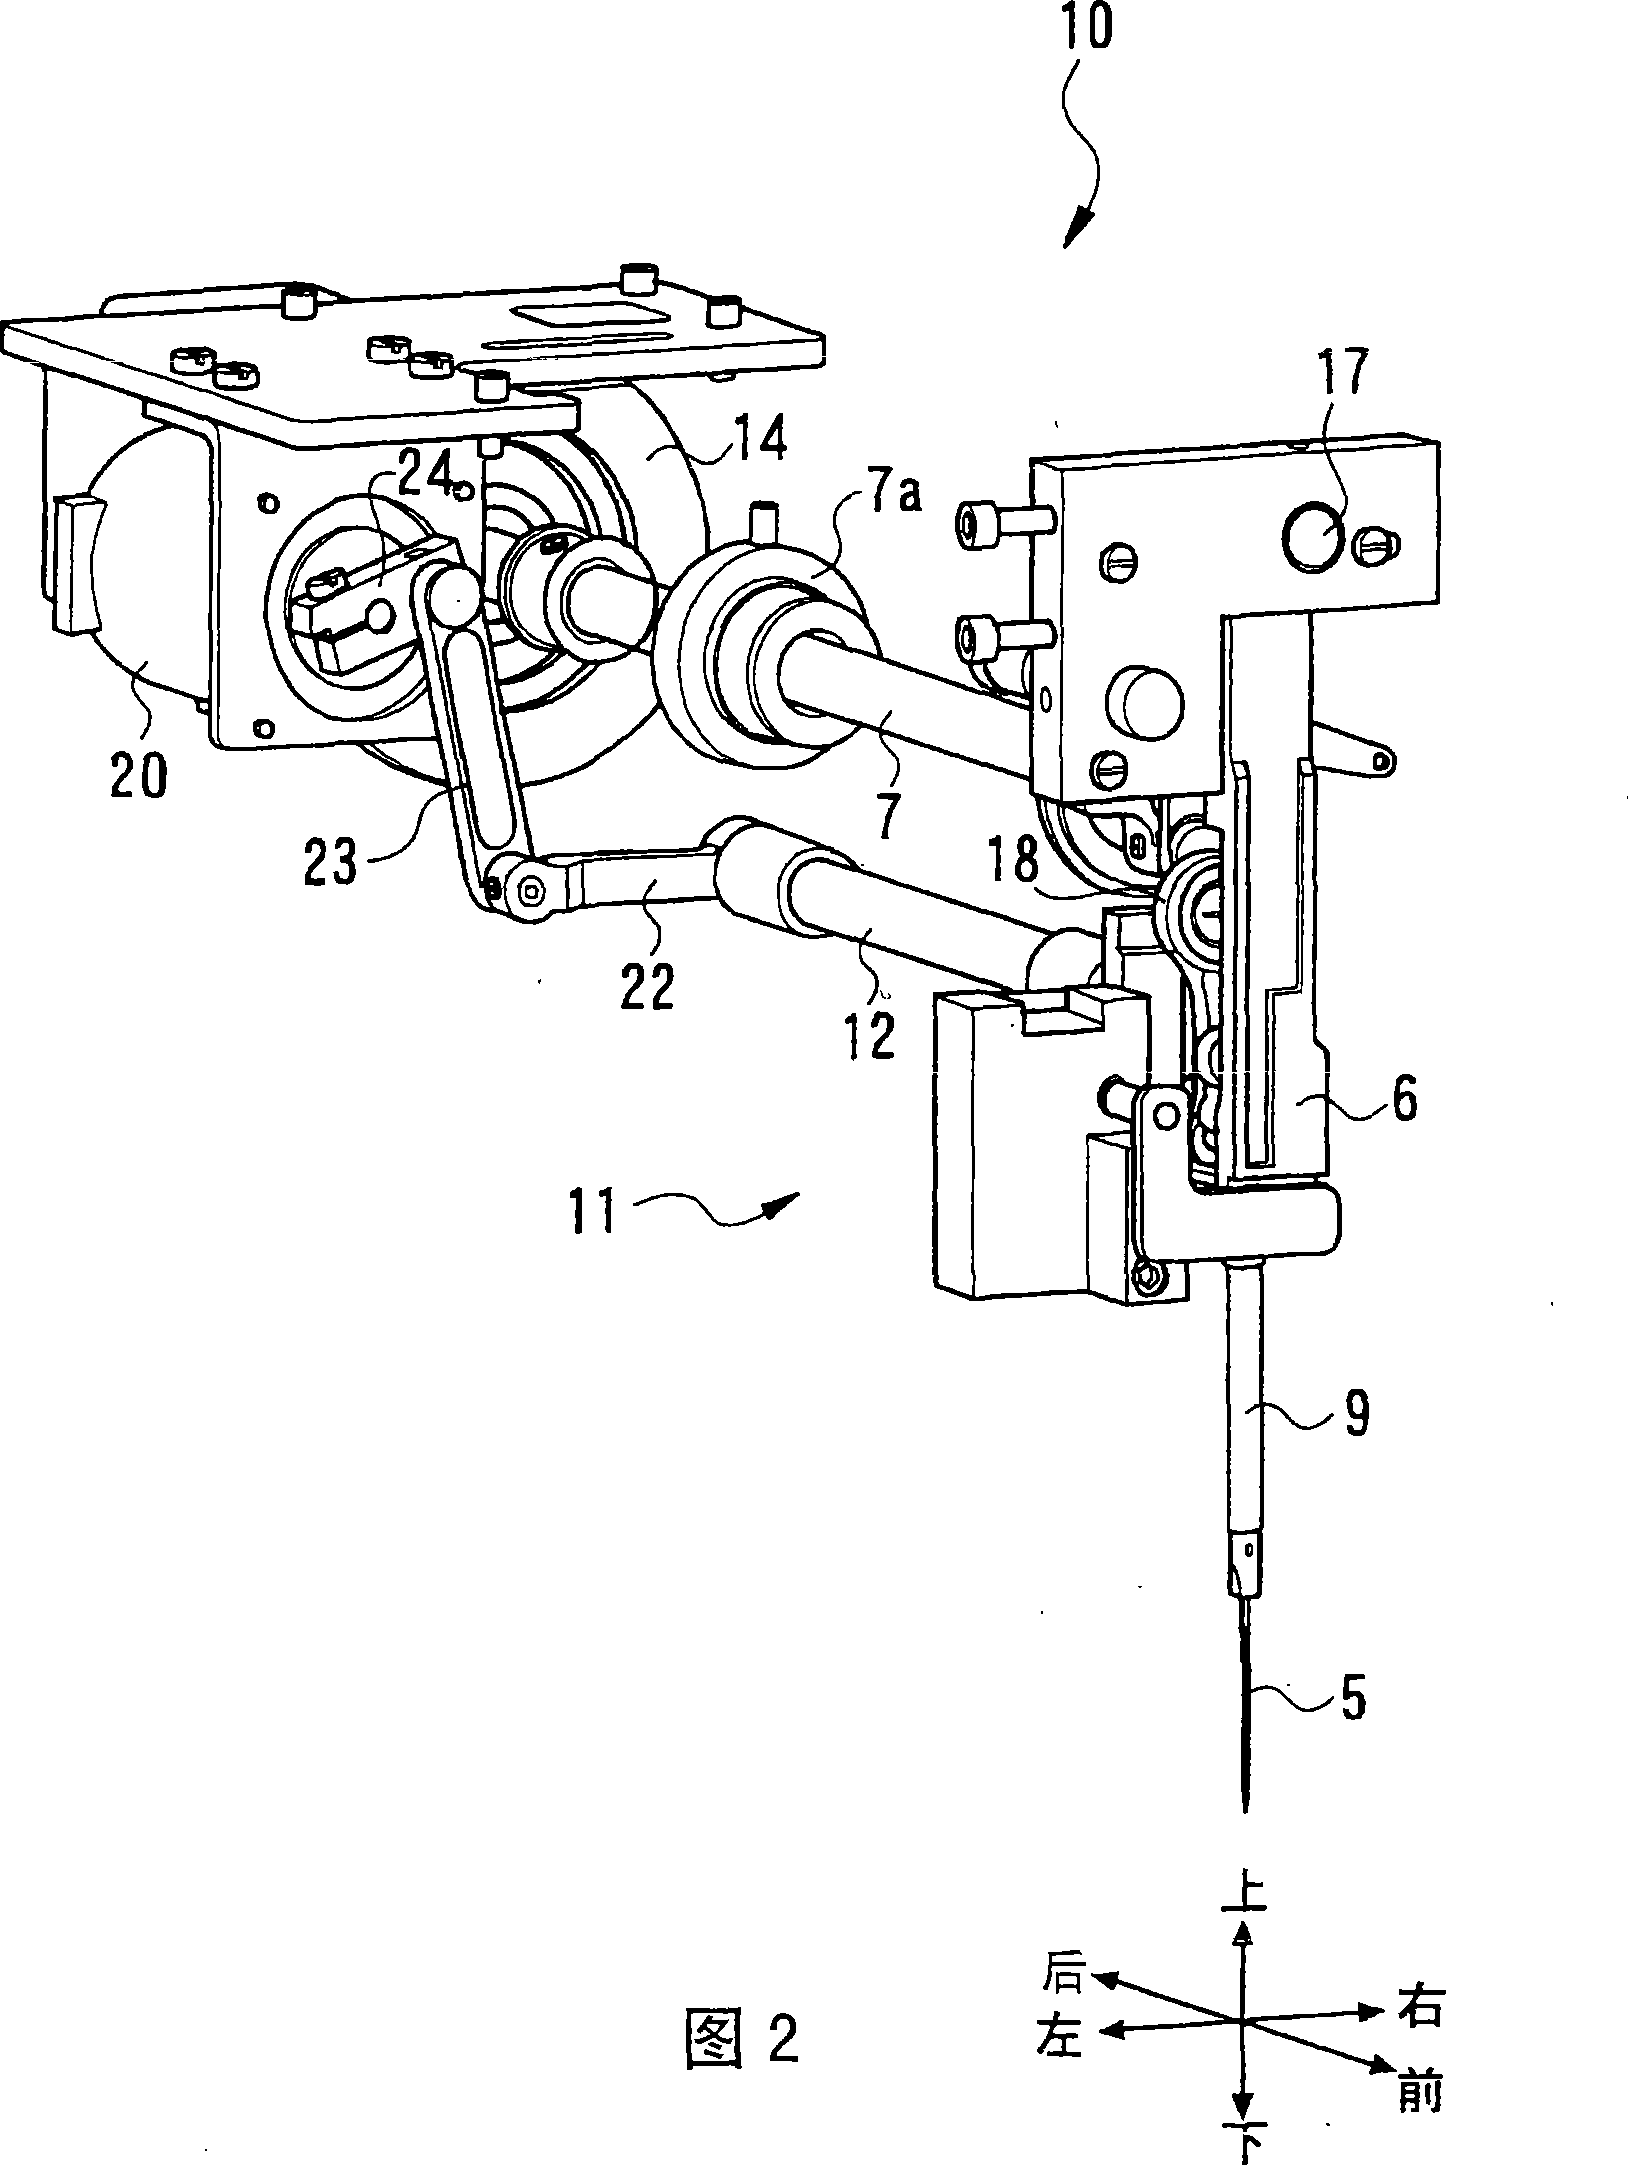 Sewing machine for buttoning